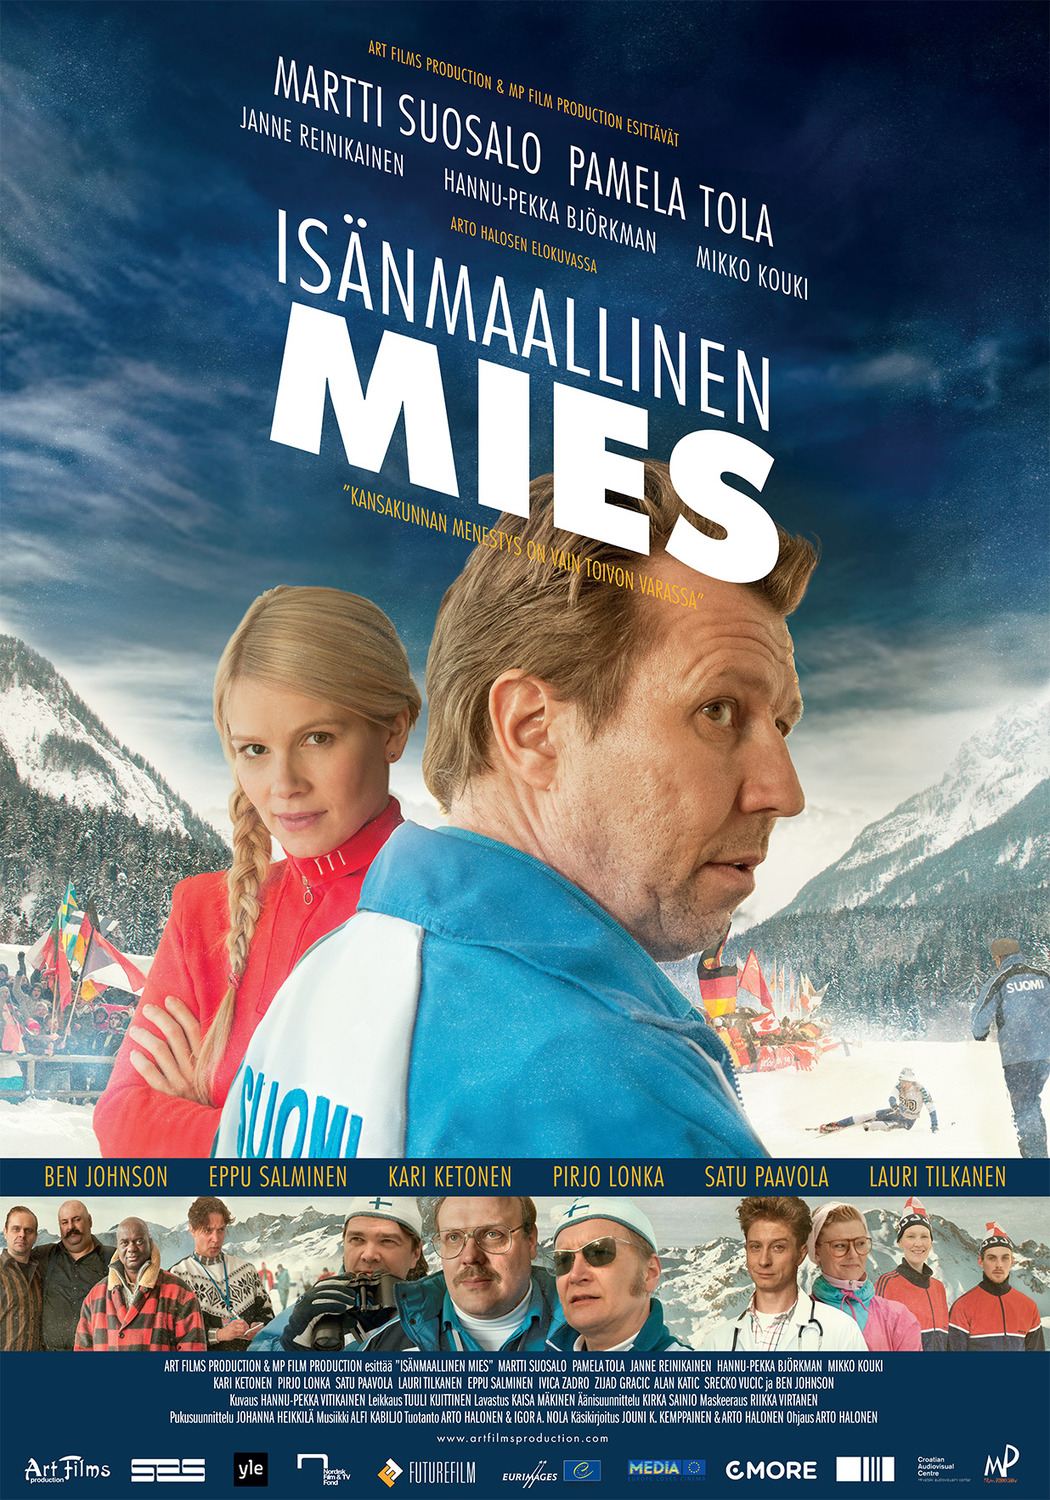 Extra Large Movie Poster Image for Isänmaallinen mies 